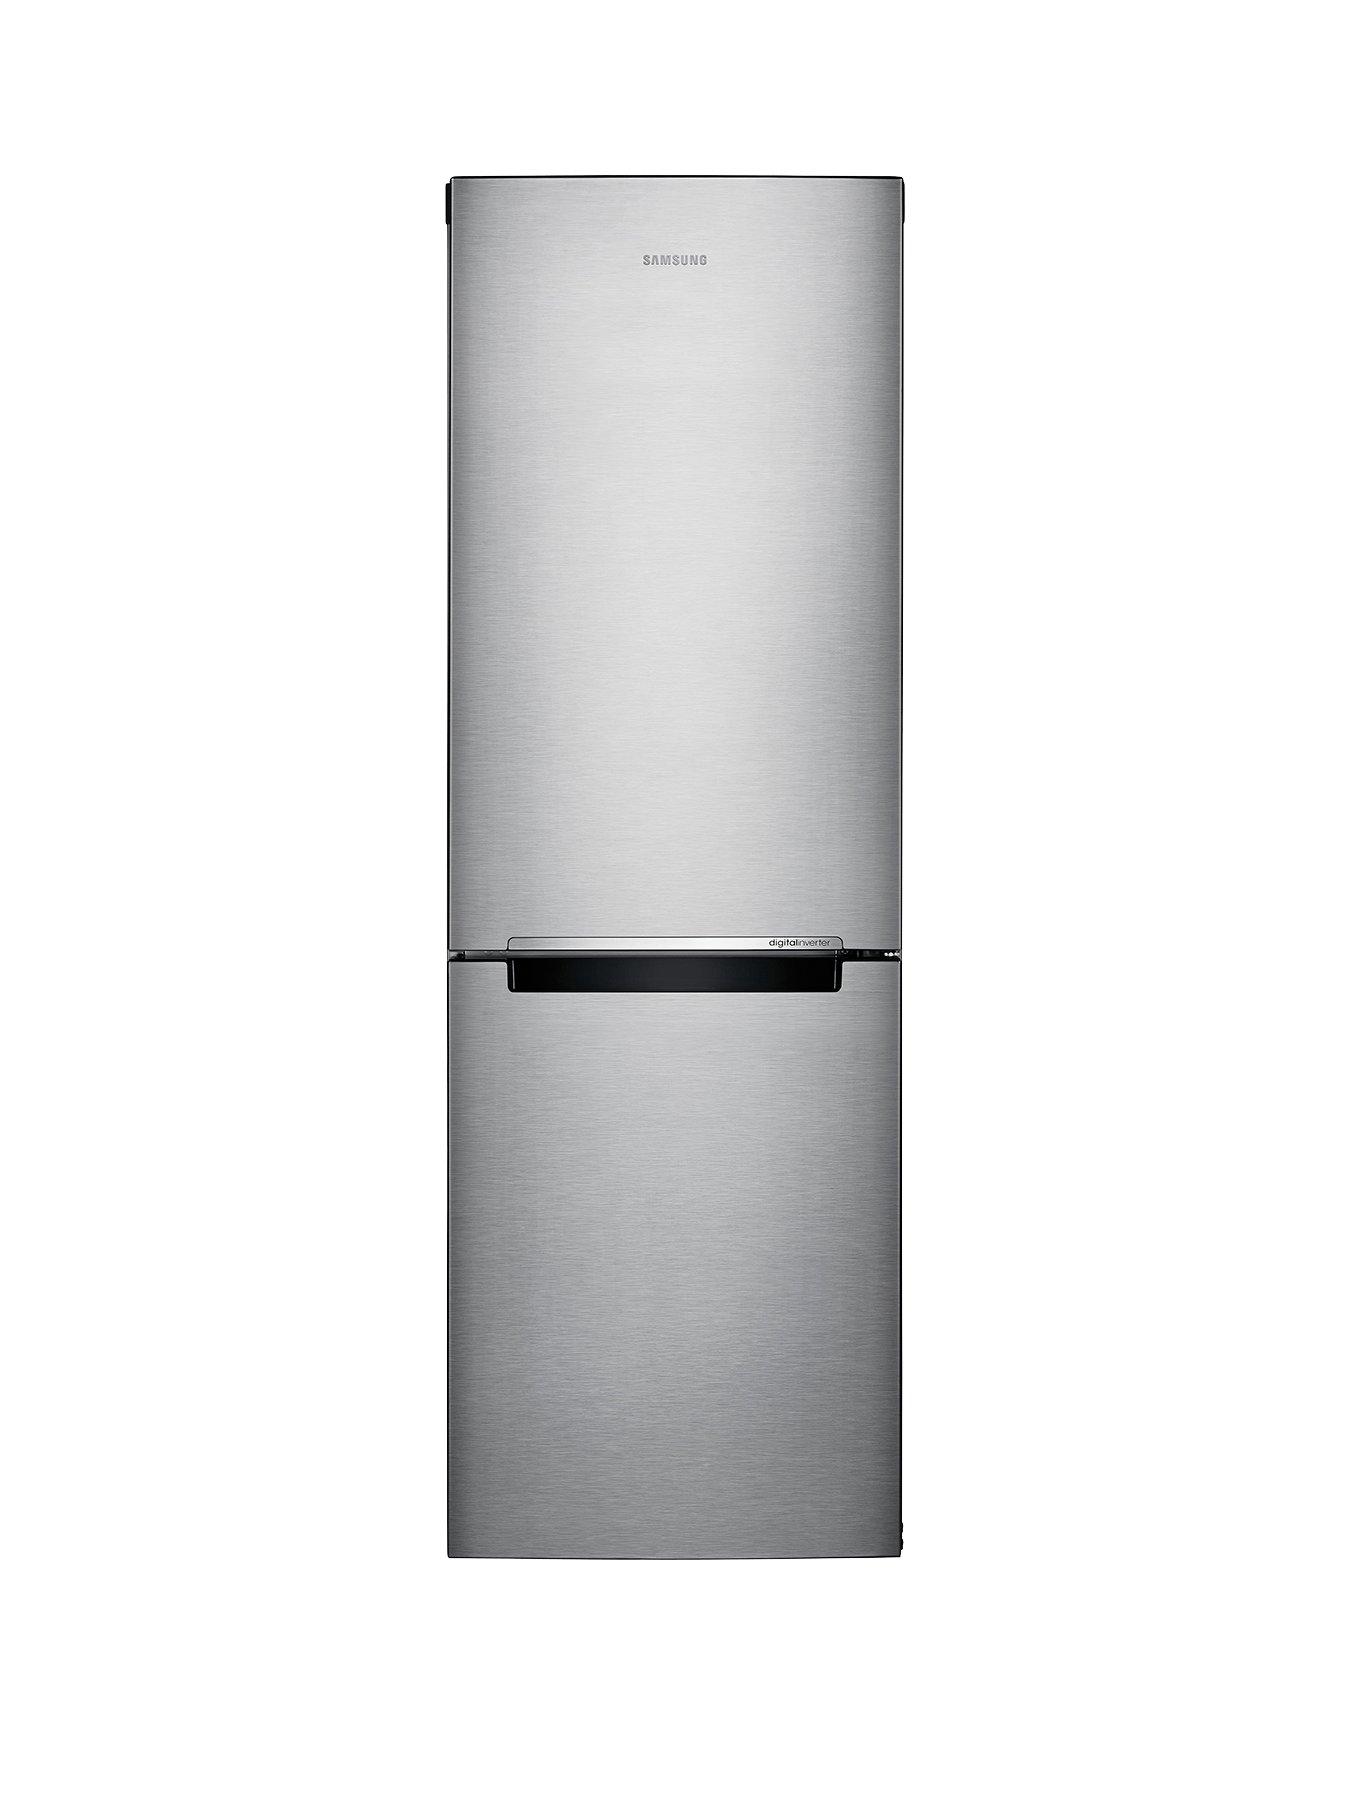 Samsung Rb29Fsrndsa/Eu 60Cm Frost-Free Fridge Freezer With Digital Inverter Technology And 5 Year Samsung Parts And Labour Warranty – Silver